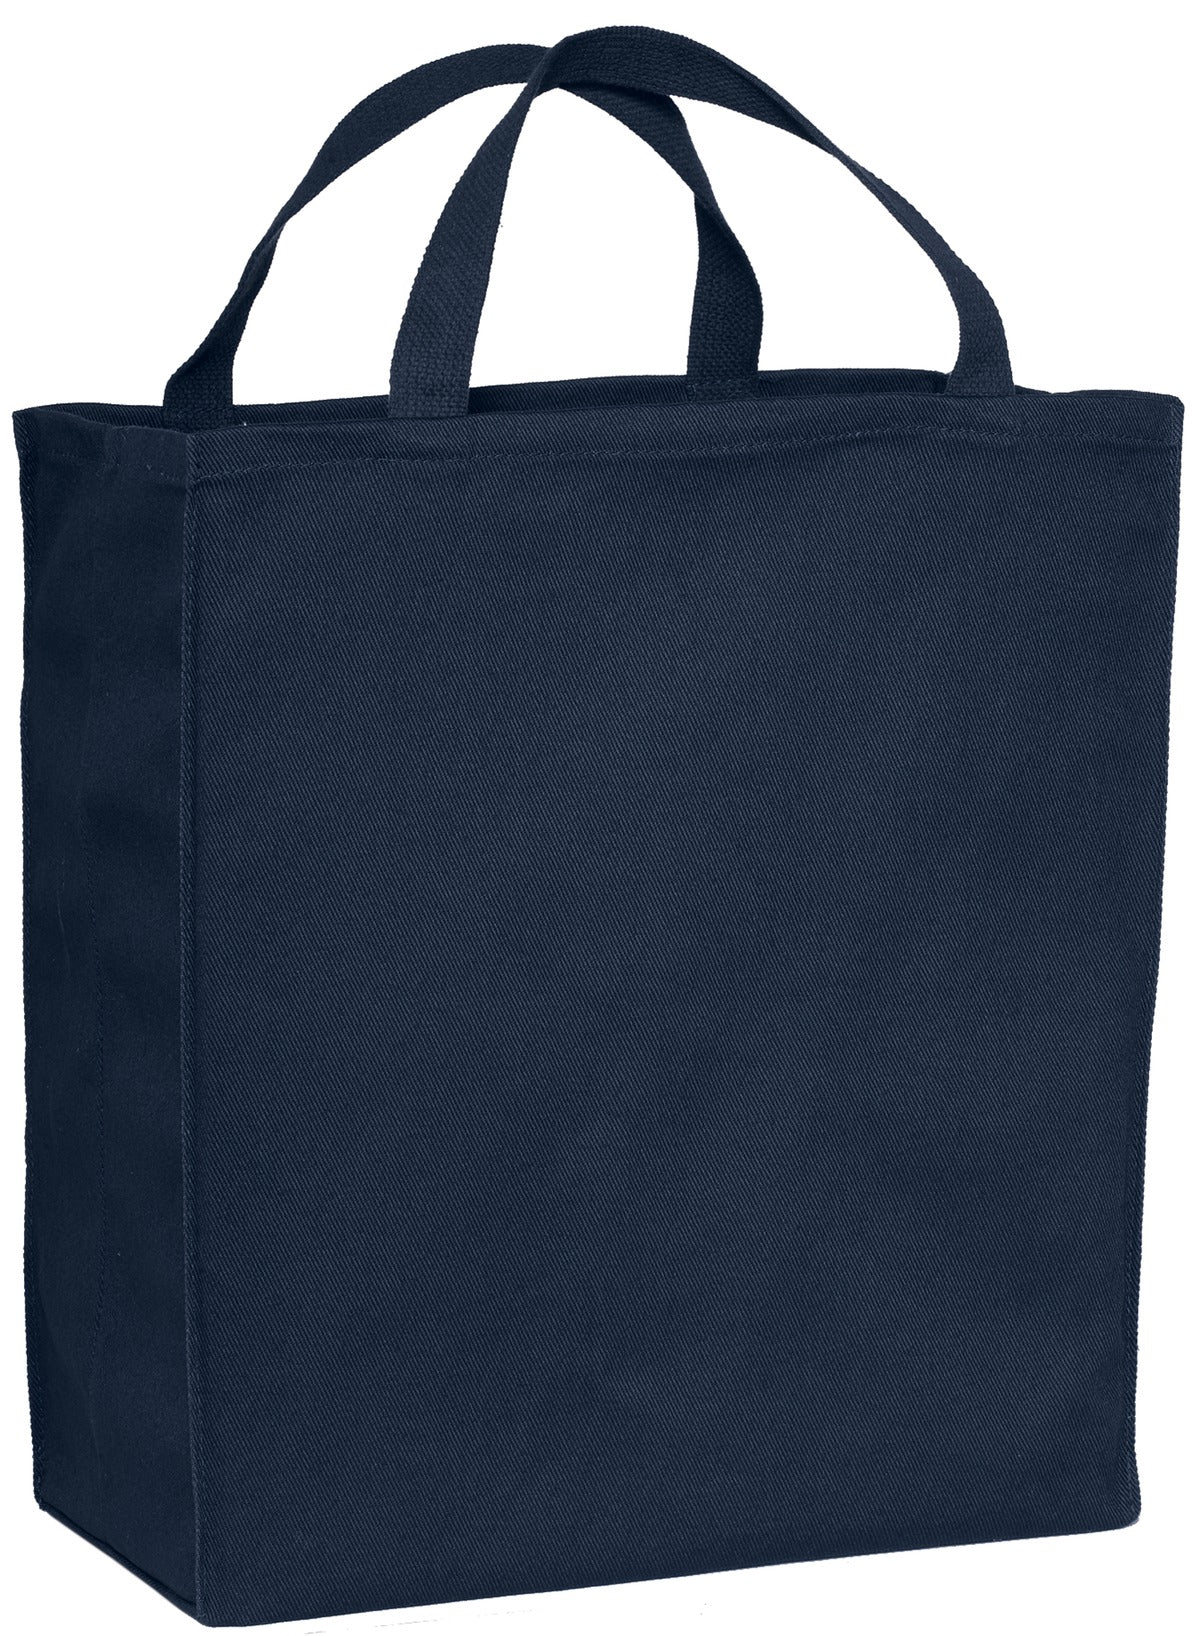 Port Authority Ideal Twill Grocery Tote. B100